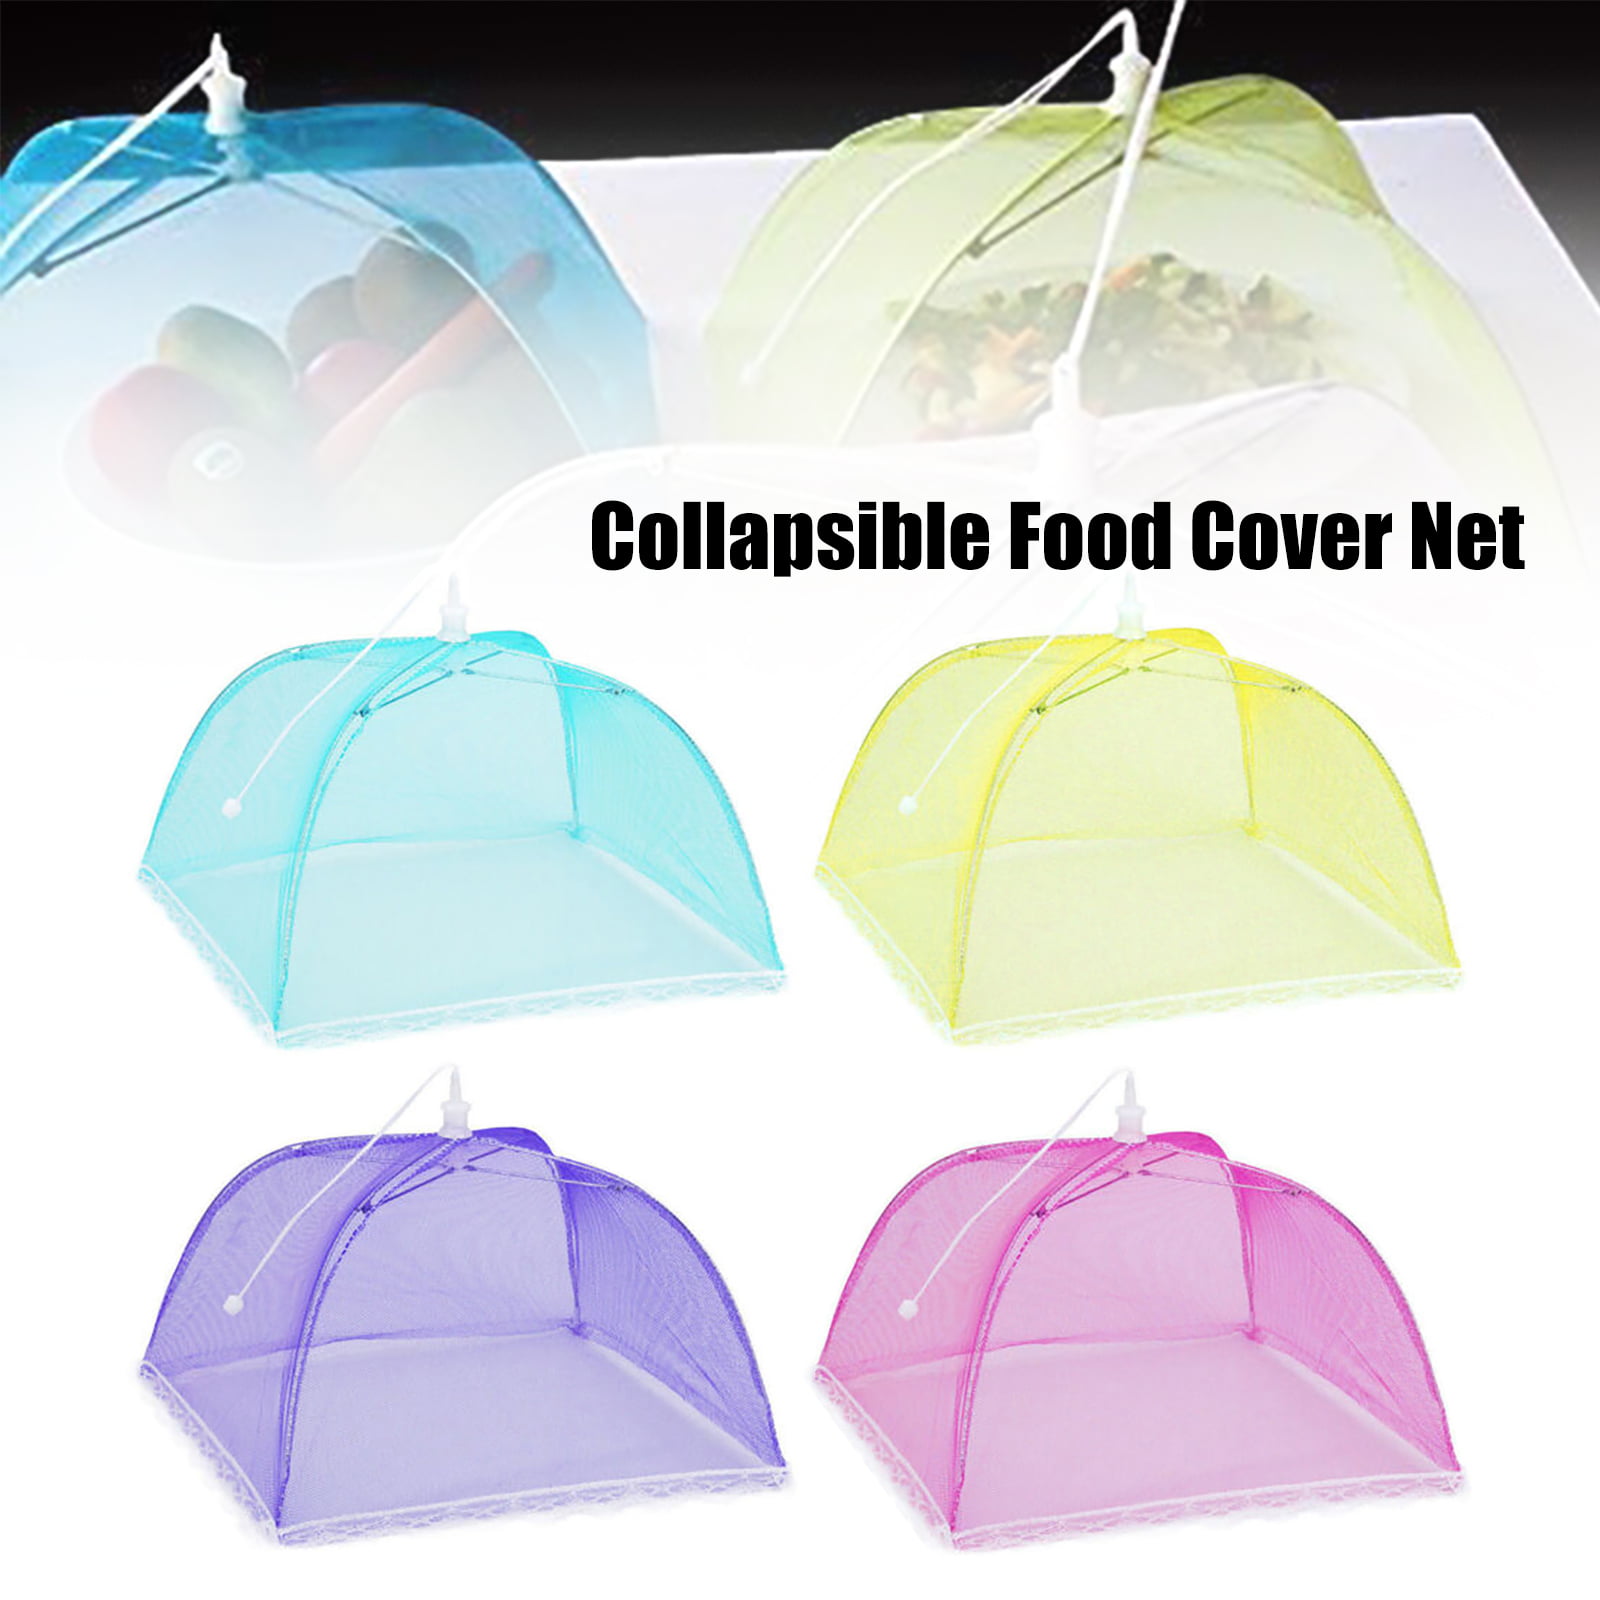 Collapsible Pop-up Food Umbrella Cover Mesh Lace Tent for Outdoor Home Beige 